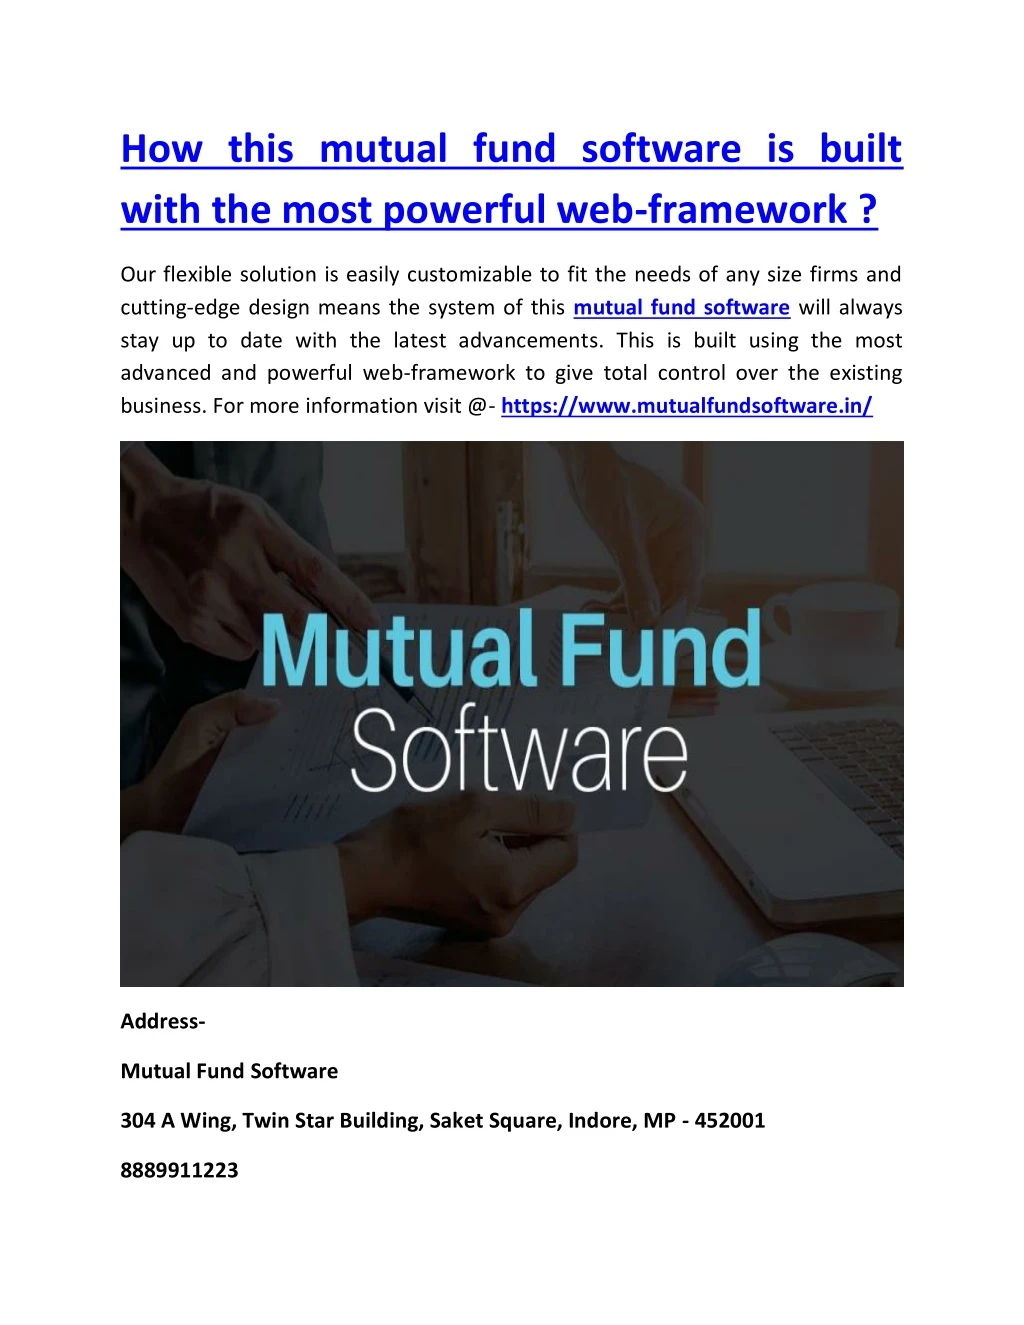 how this mutual fund software is built with